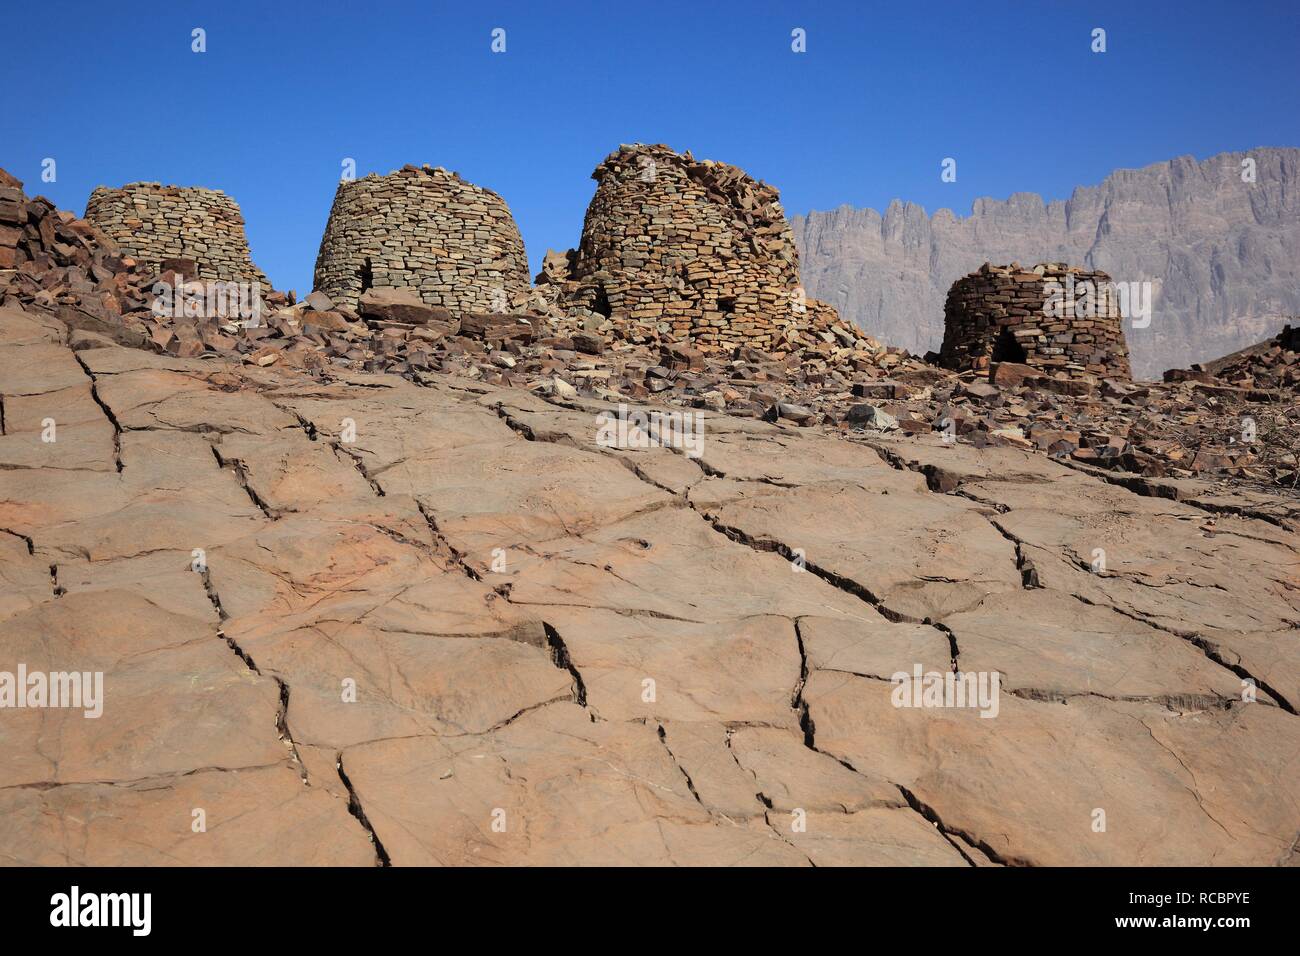 The Beehive Tombs of Al-Ayn on the edge of Jebel Misht mountain ridge, in the area between the towns of Bat and Al-Ayn in the Stock Photo